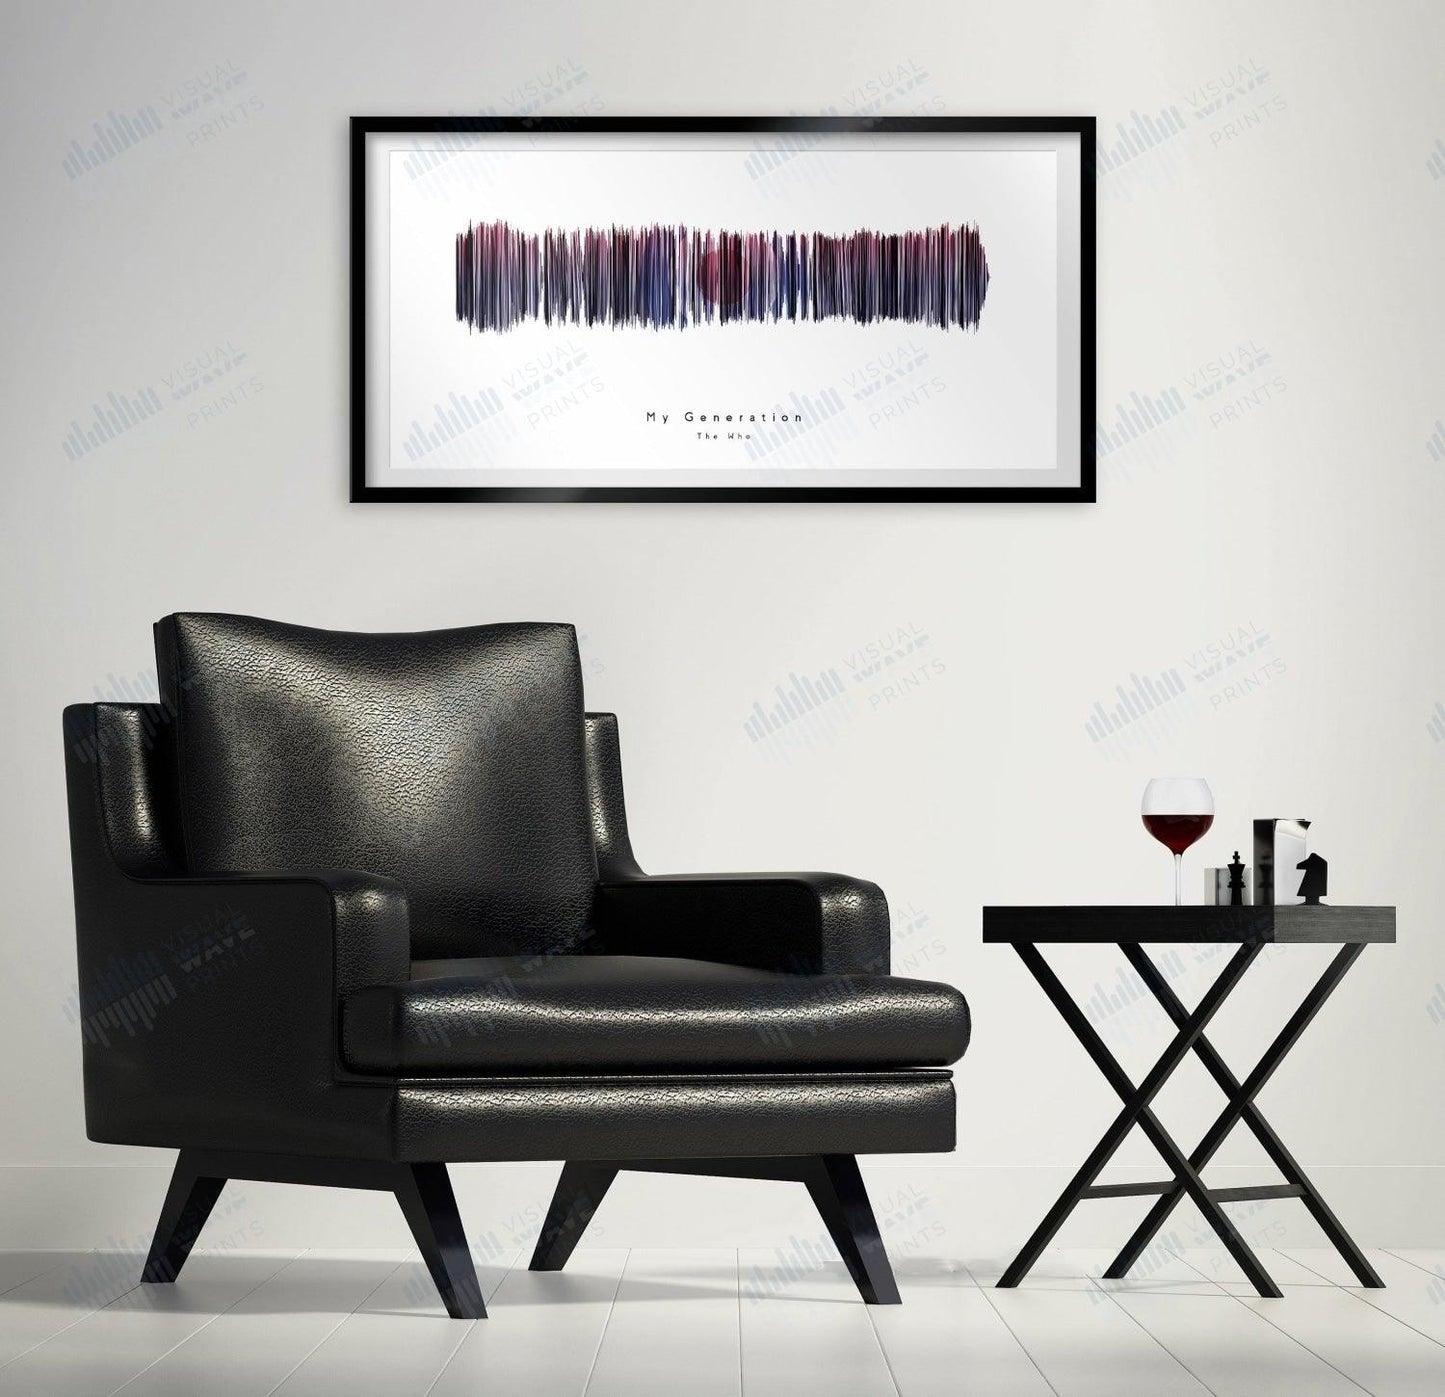 My Generation by The Who - Visual Wave Prints